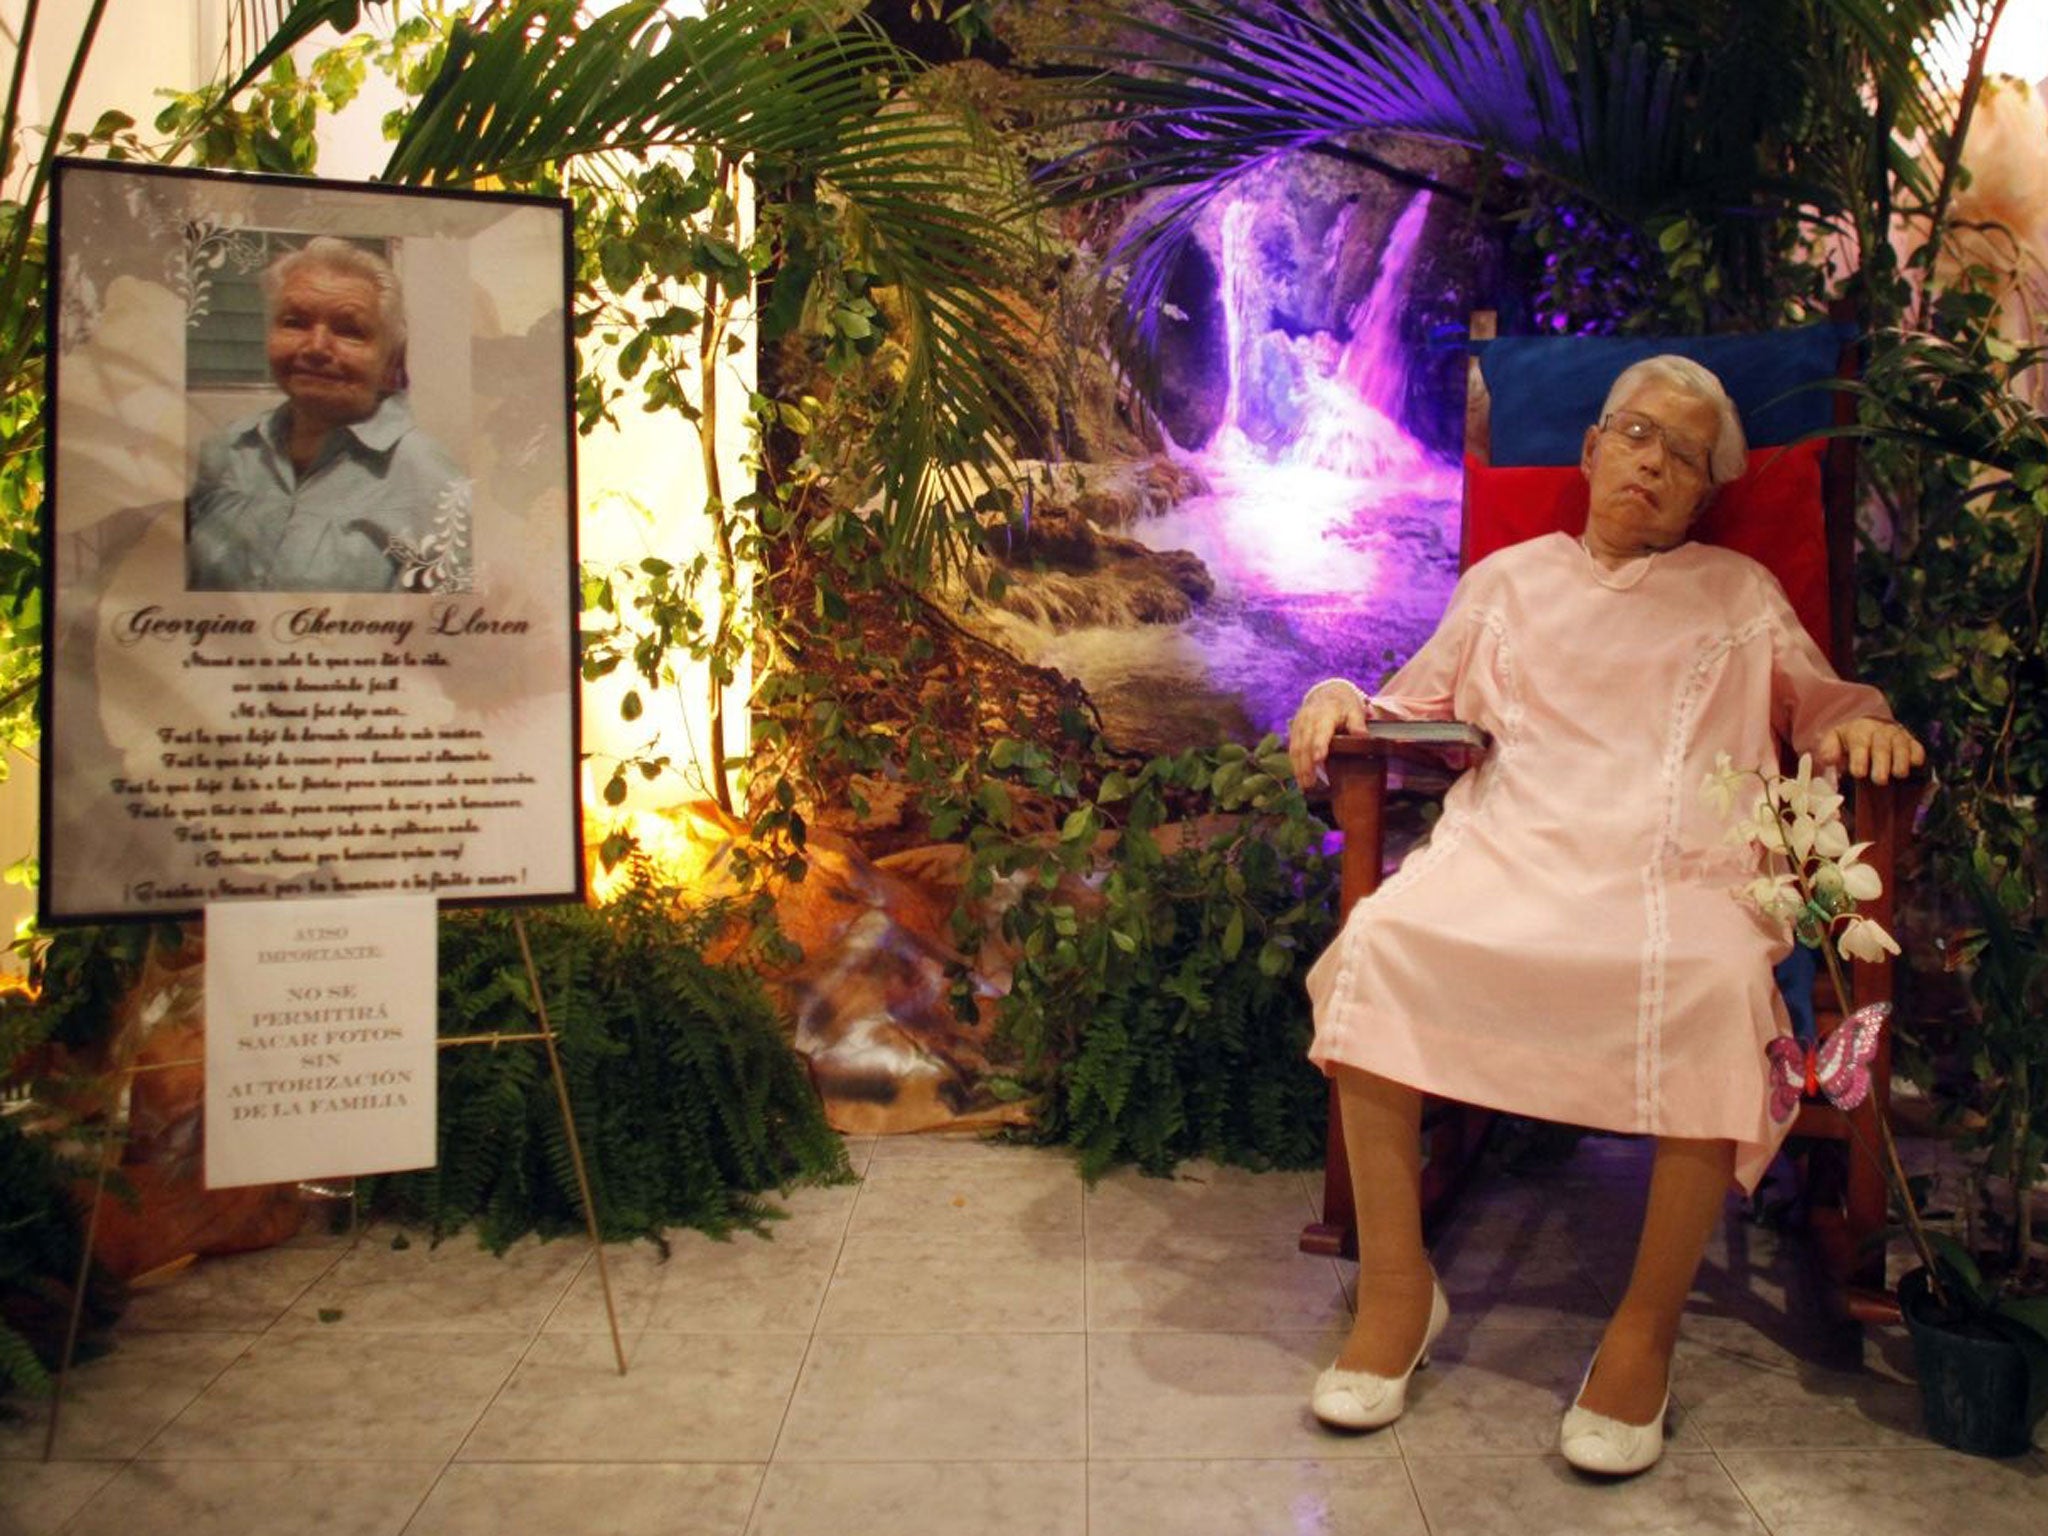 The body of Georgina Chervony Lloren, who died of natural causes on Sunday at the age of 80, is propped up in a rocking chair during her wake in a funeral home in San Juan, Puerto Rico, Monday, May 26, 2014.